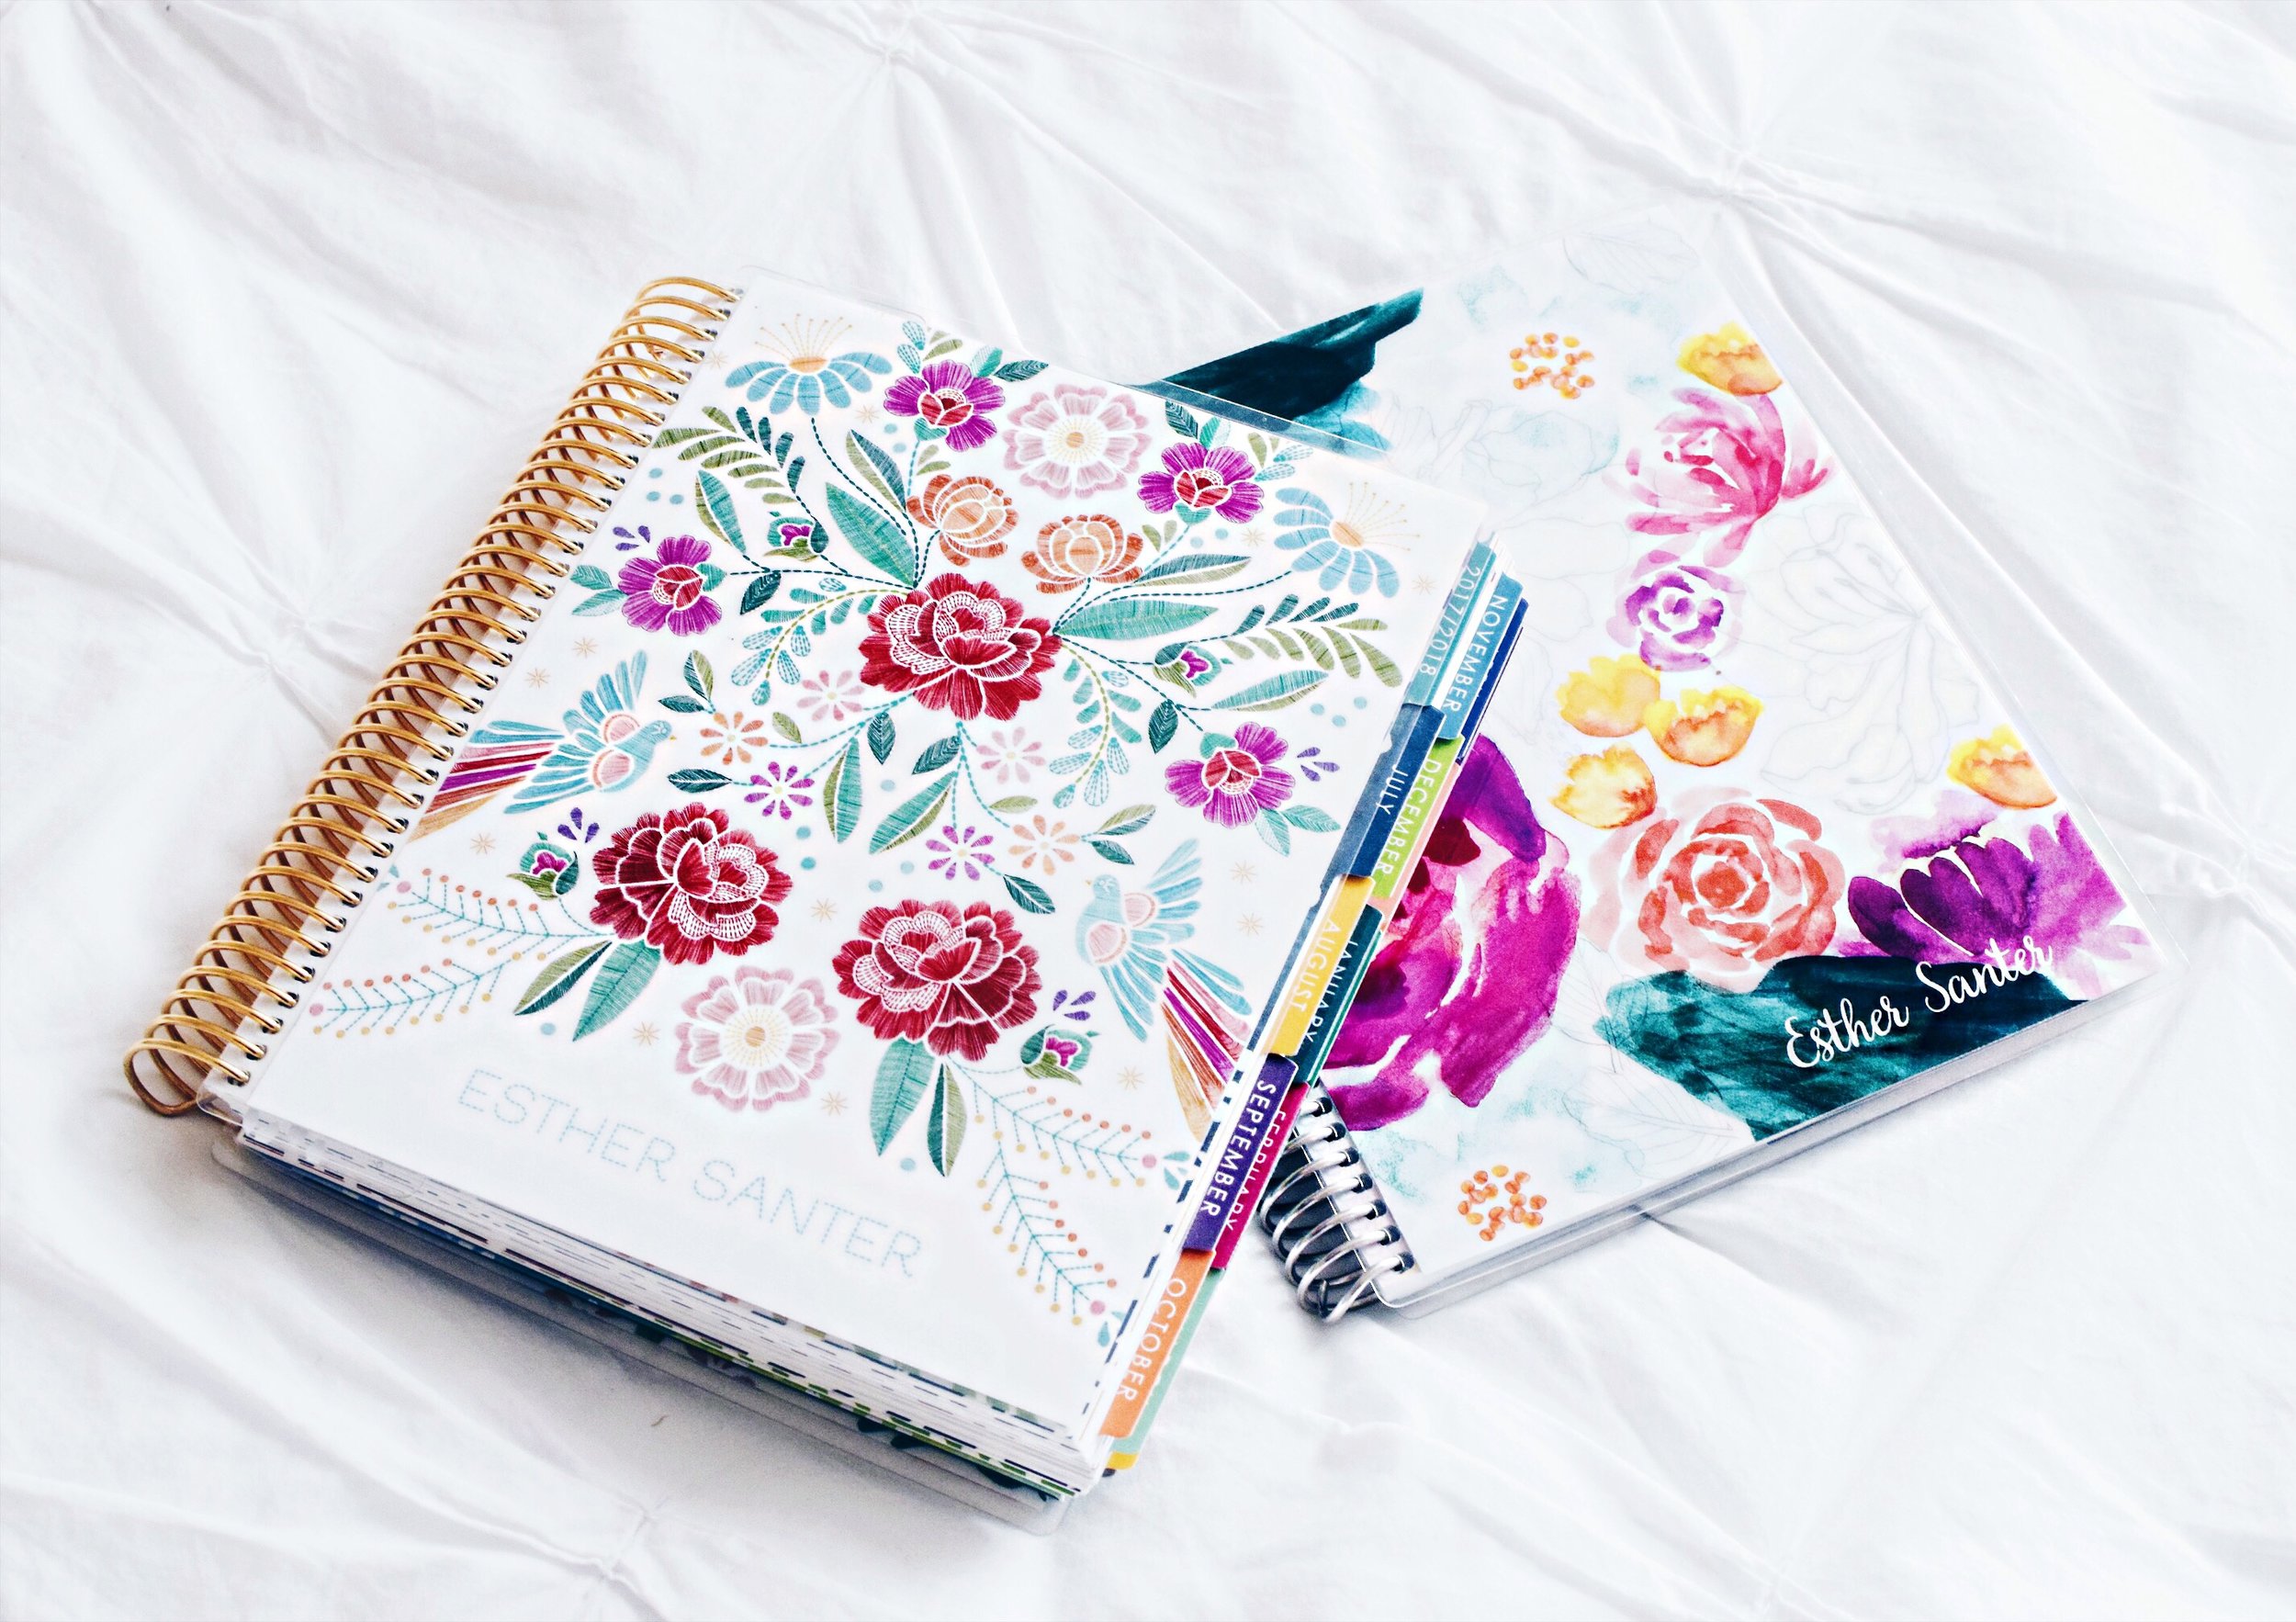 Planner Heaven At The Erin Condren Launch Party Esther Santer Fashion Blog NYC Street Style Blogger Trendy Girl Women Flatlay Paper Stationary Cardstock Pens Markers Colorful Fun Bold Pretty Notebook Floral Design Silver Gold Customizable Personalize.JPG